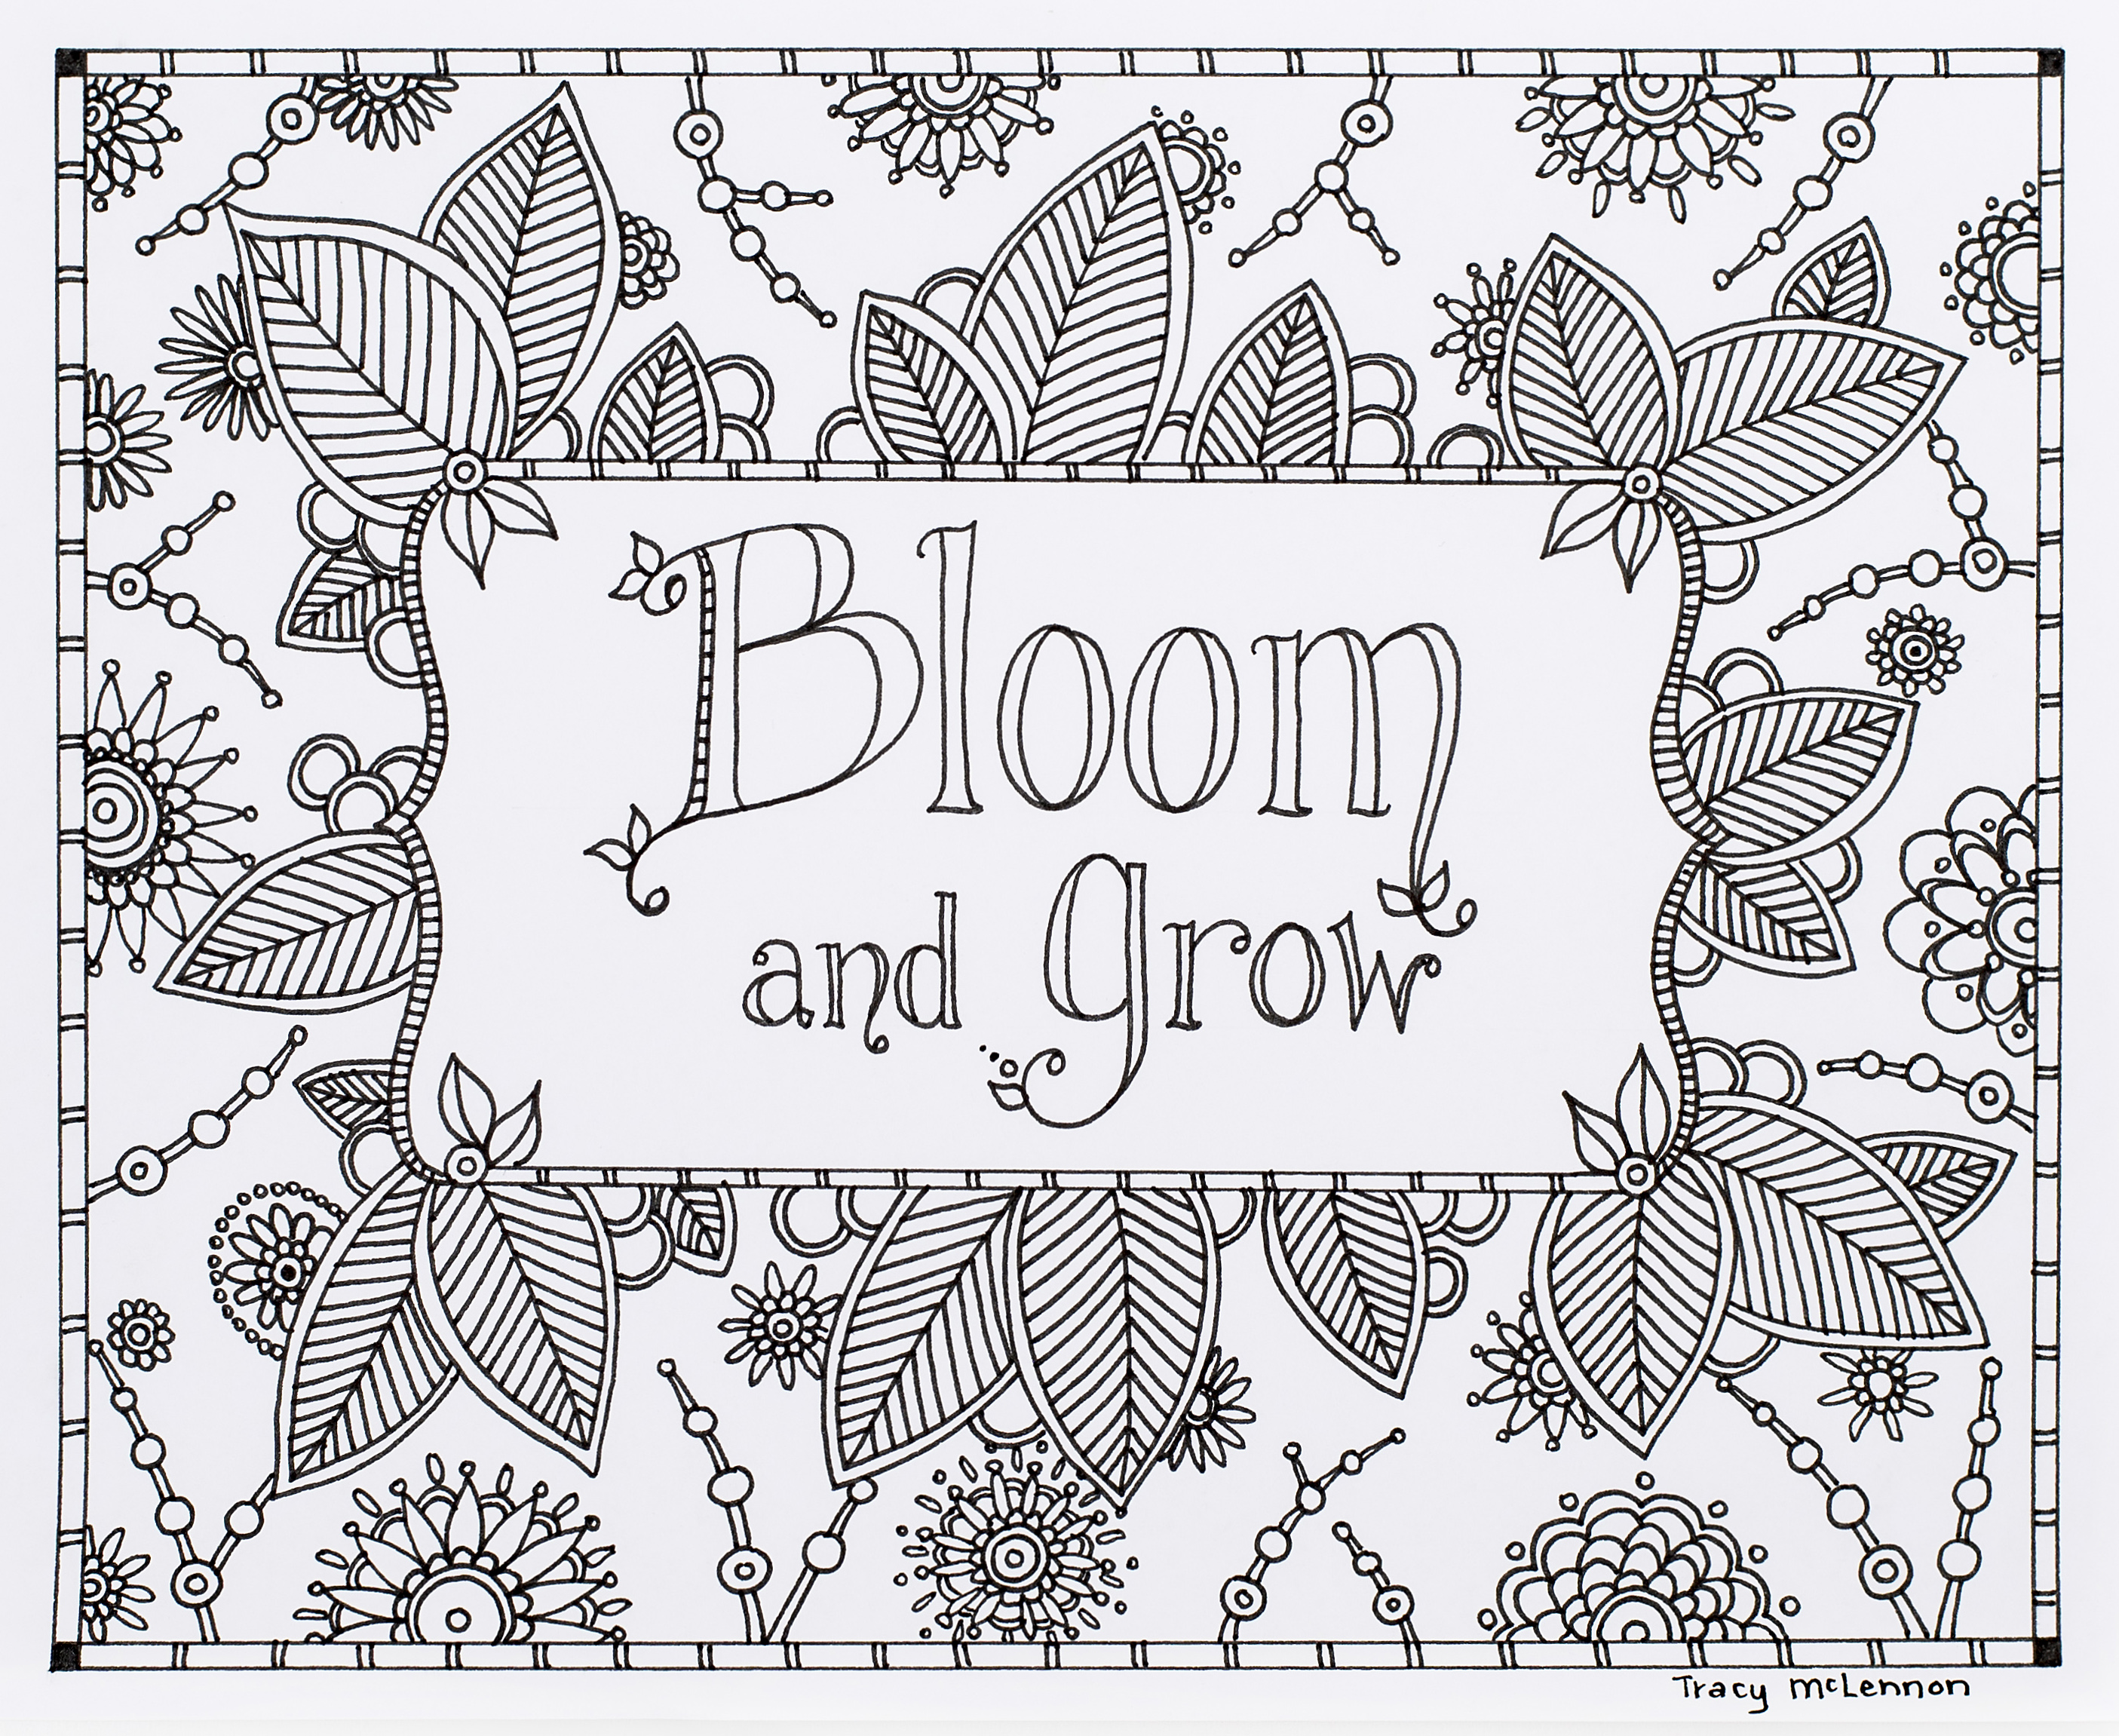 Free colouring project